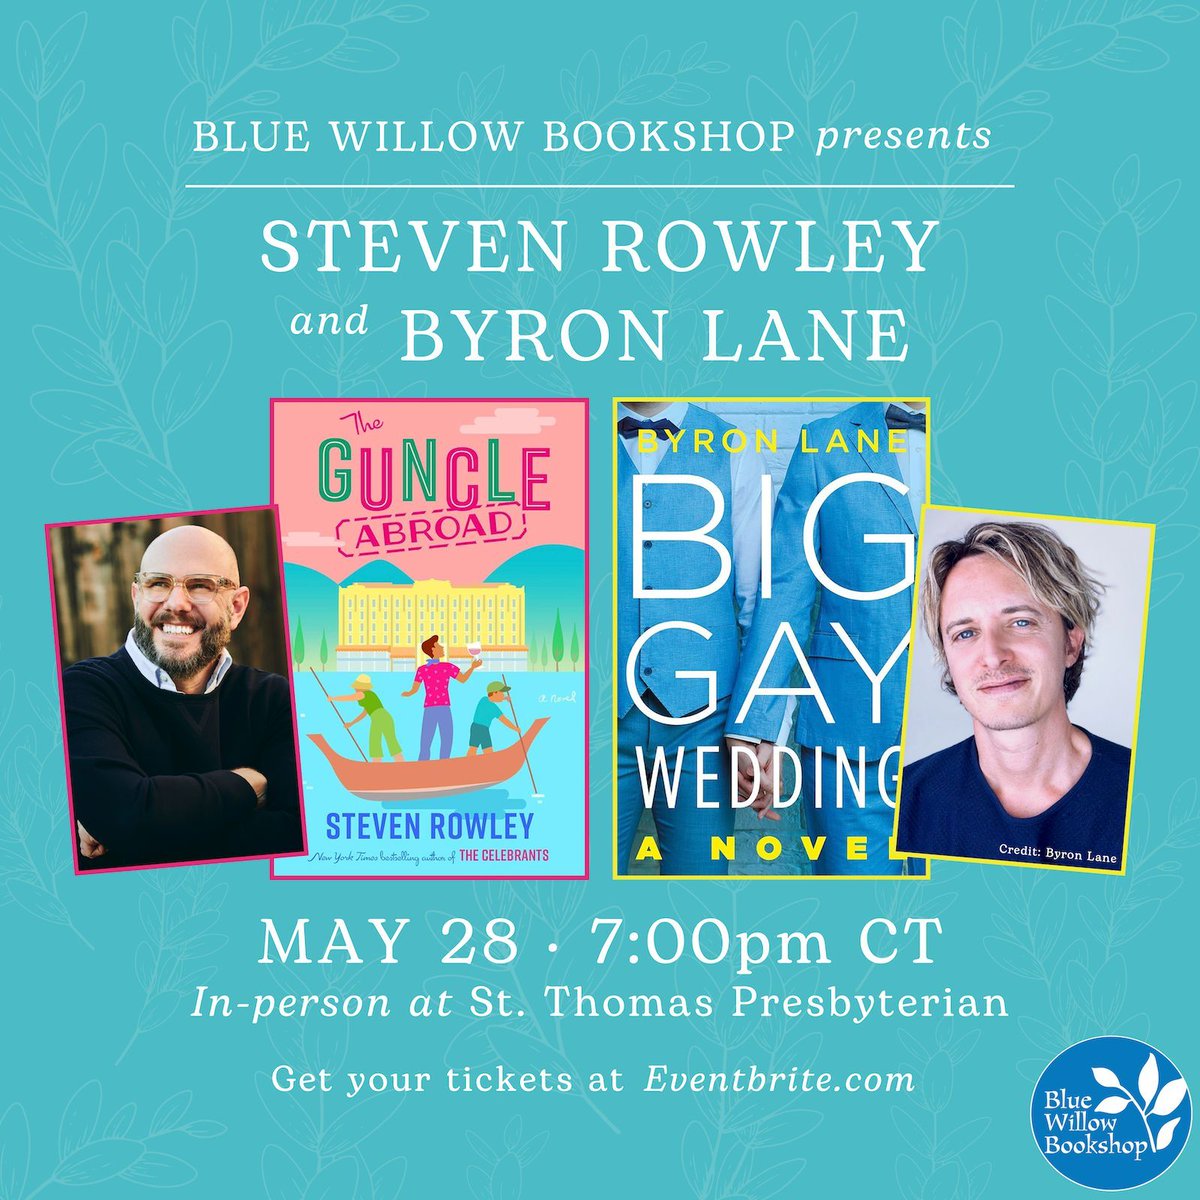 Next month, we're thrilled to welcome Steven Rowley and @byronlane to #Houston for a joint event celebrating their books THE GUNCLE ABROAD and BIG GAY WEDDING! 🌈📘 Tickets are available now—don't miss this one, friends! bluewillowbookshop.com/event/rowley-l… @PutnamBooks @HenryHolt